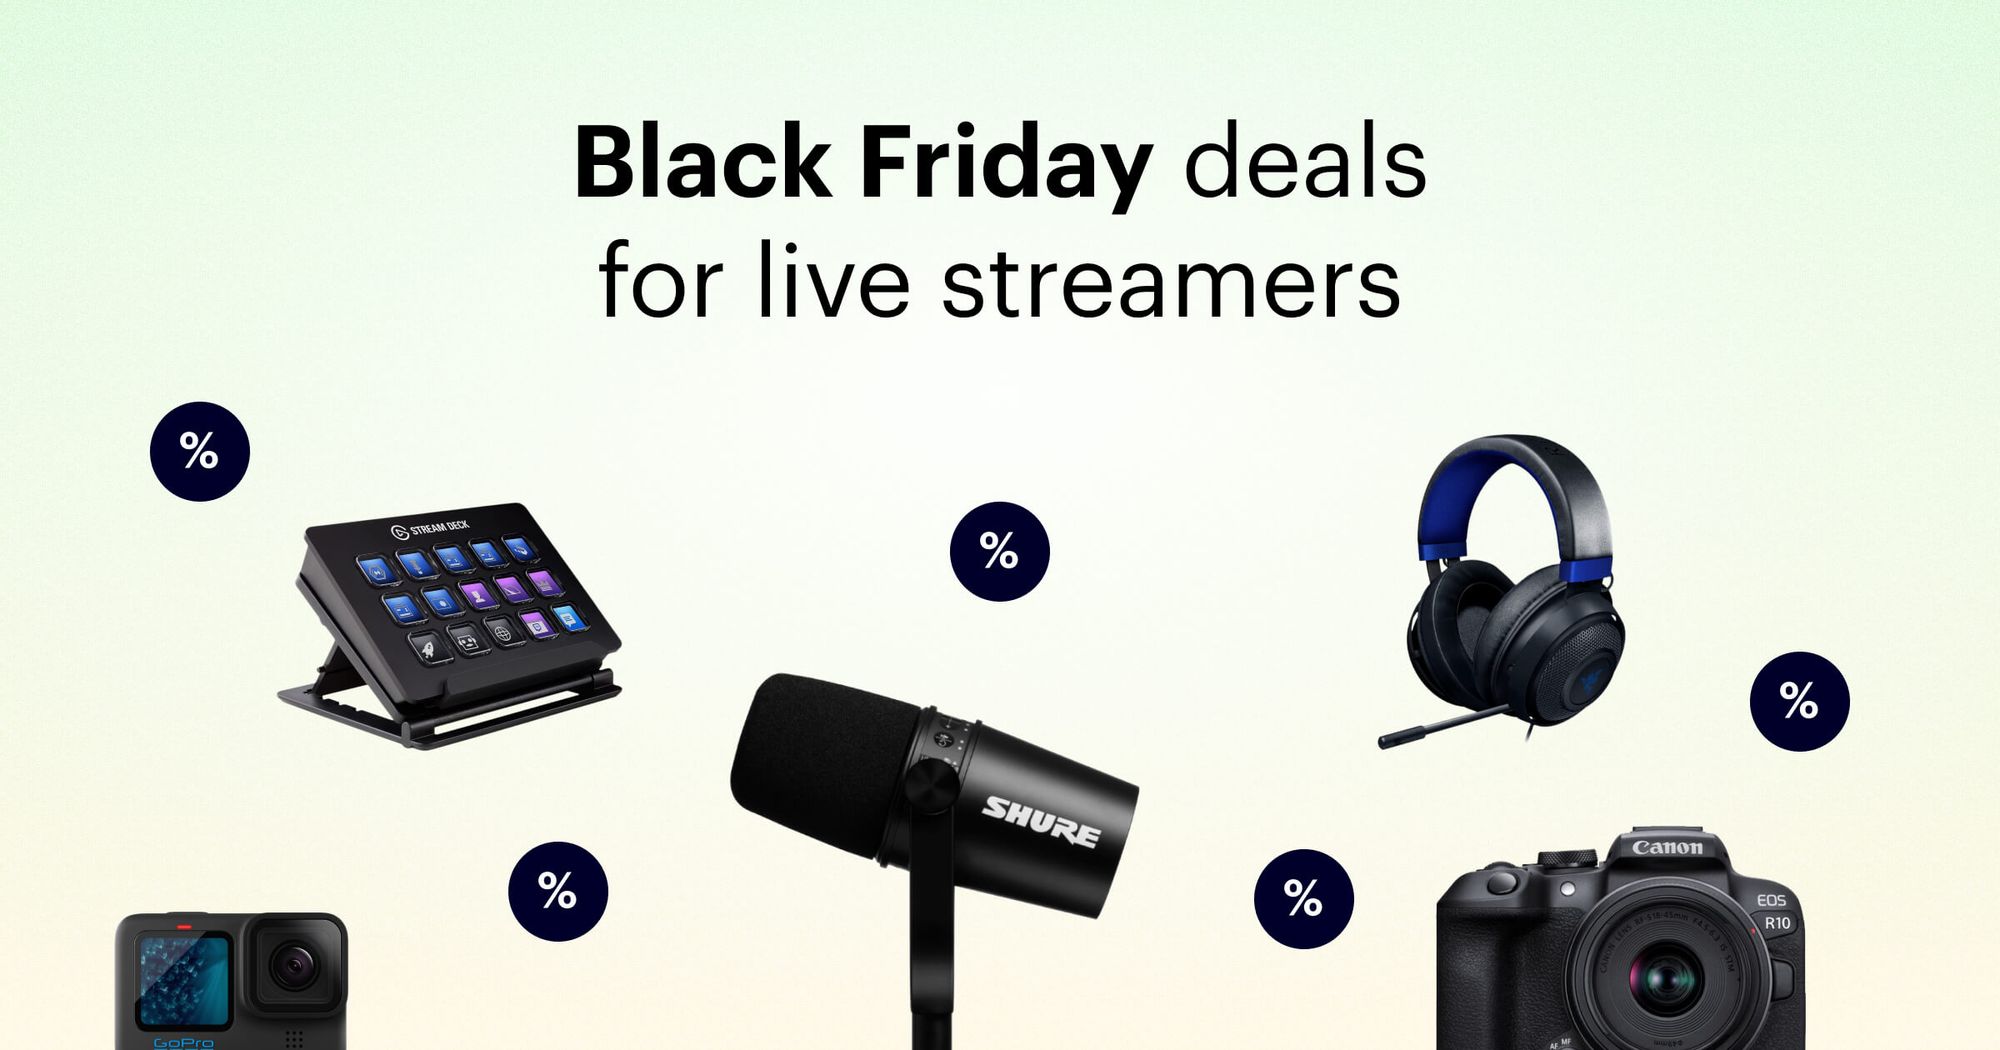 Black Friday Best Pricing, Same-Day Delivery, Virtual Apps And